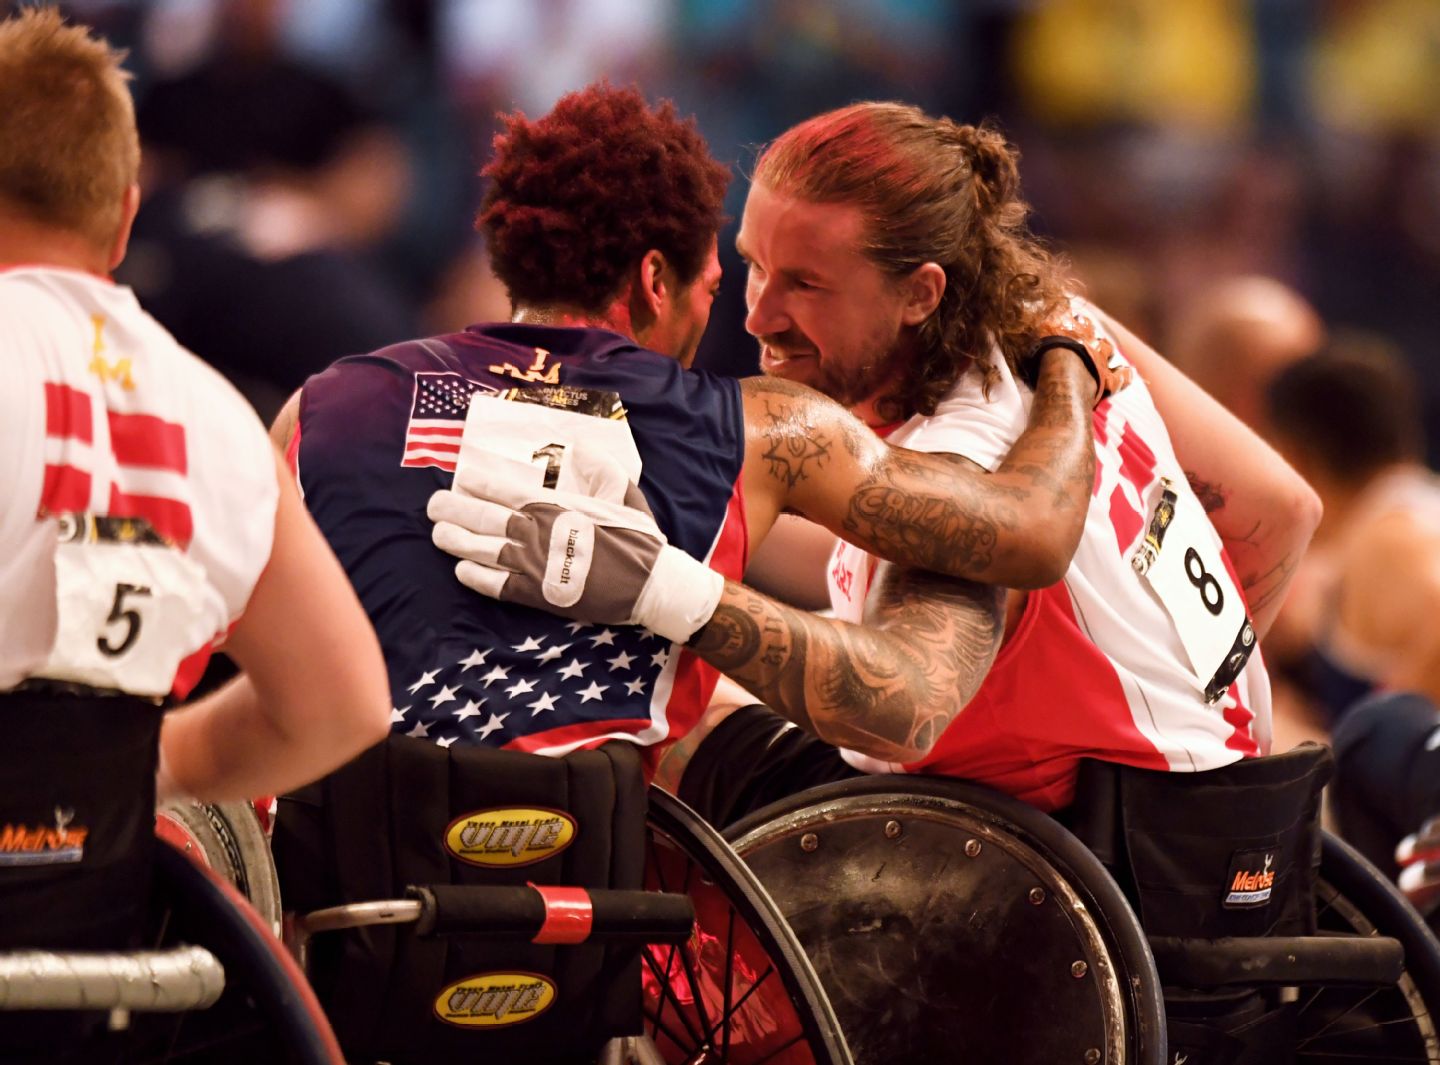 The World Games 2022 is the most accessible sporting event ever—why it matters